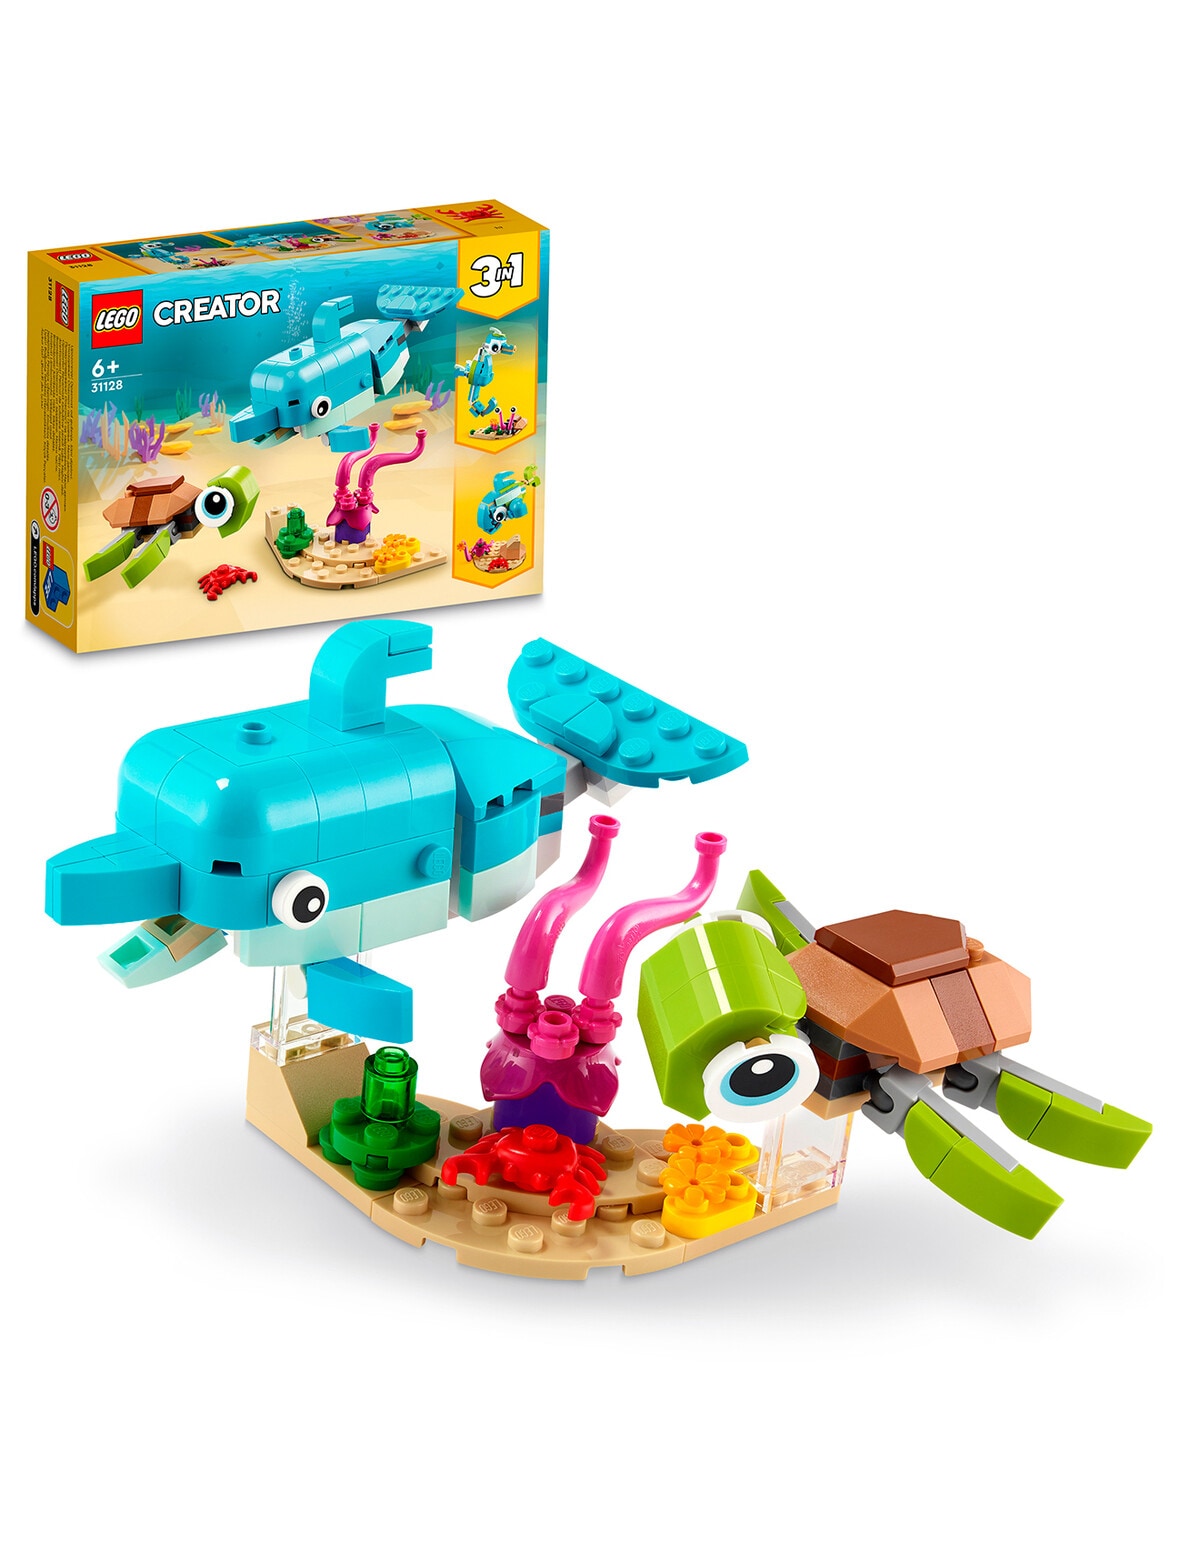 LEGO Creator 3-in-1 Dolphin and Turtle, 31128 - Lego & Construction